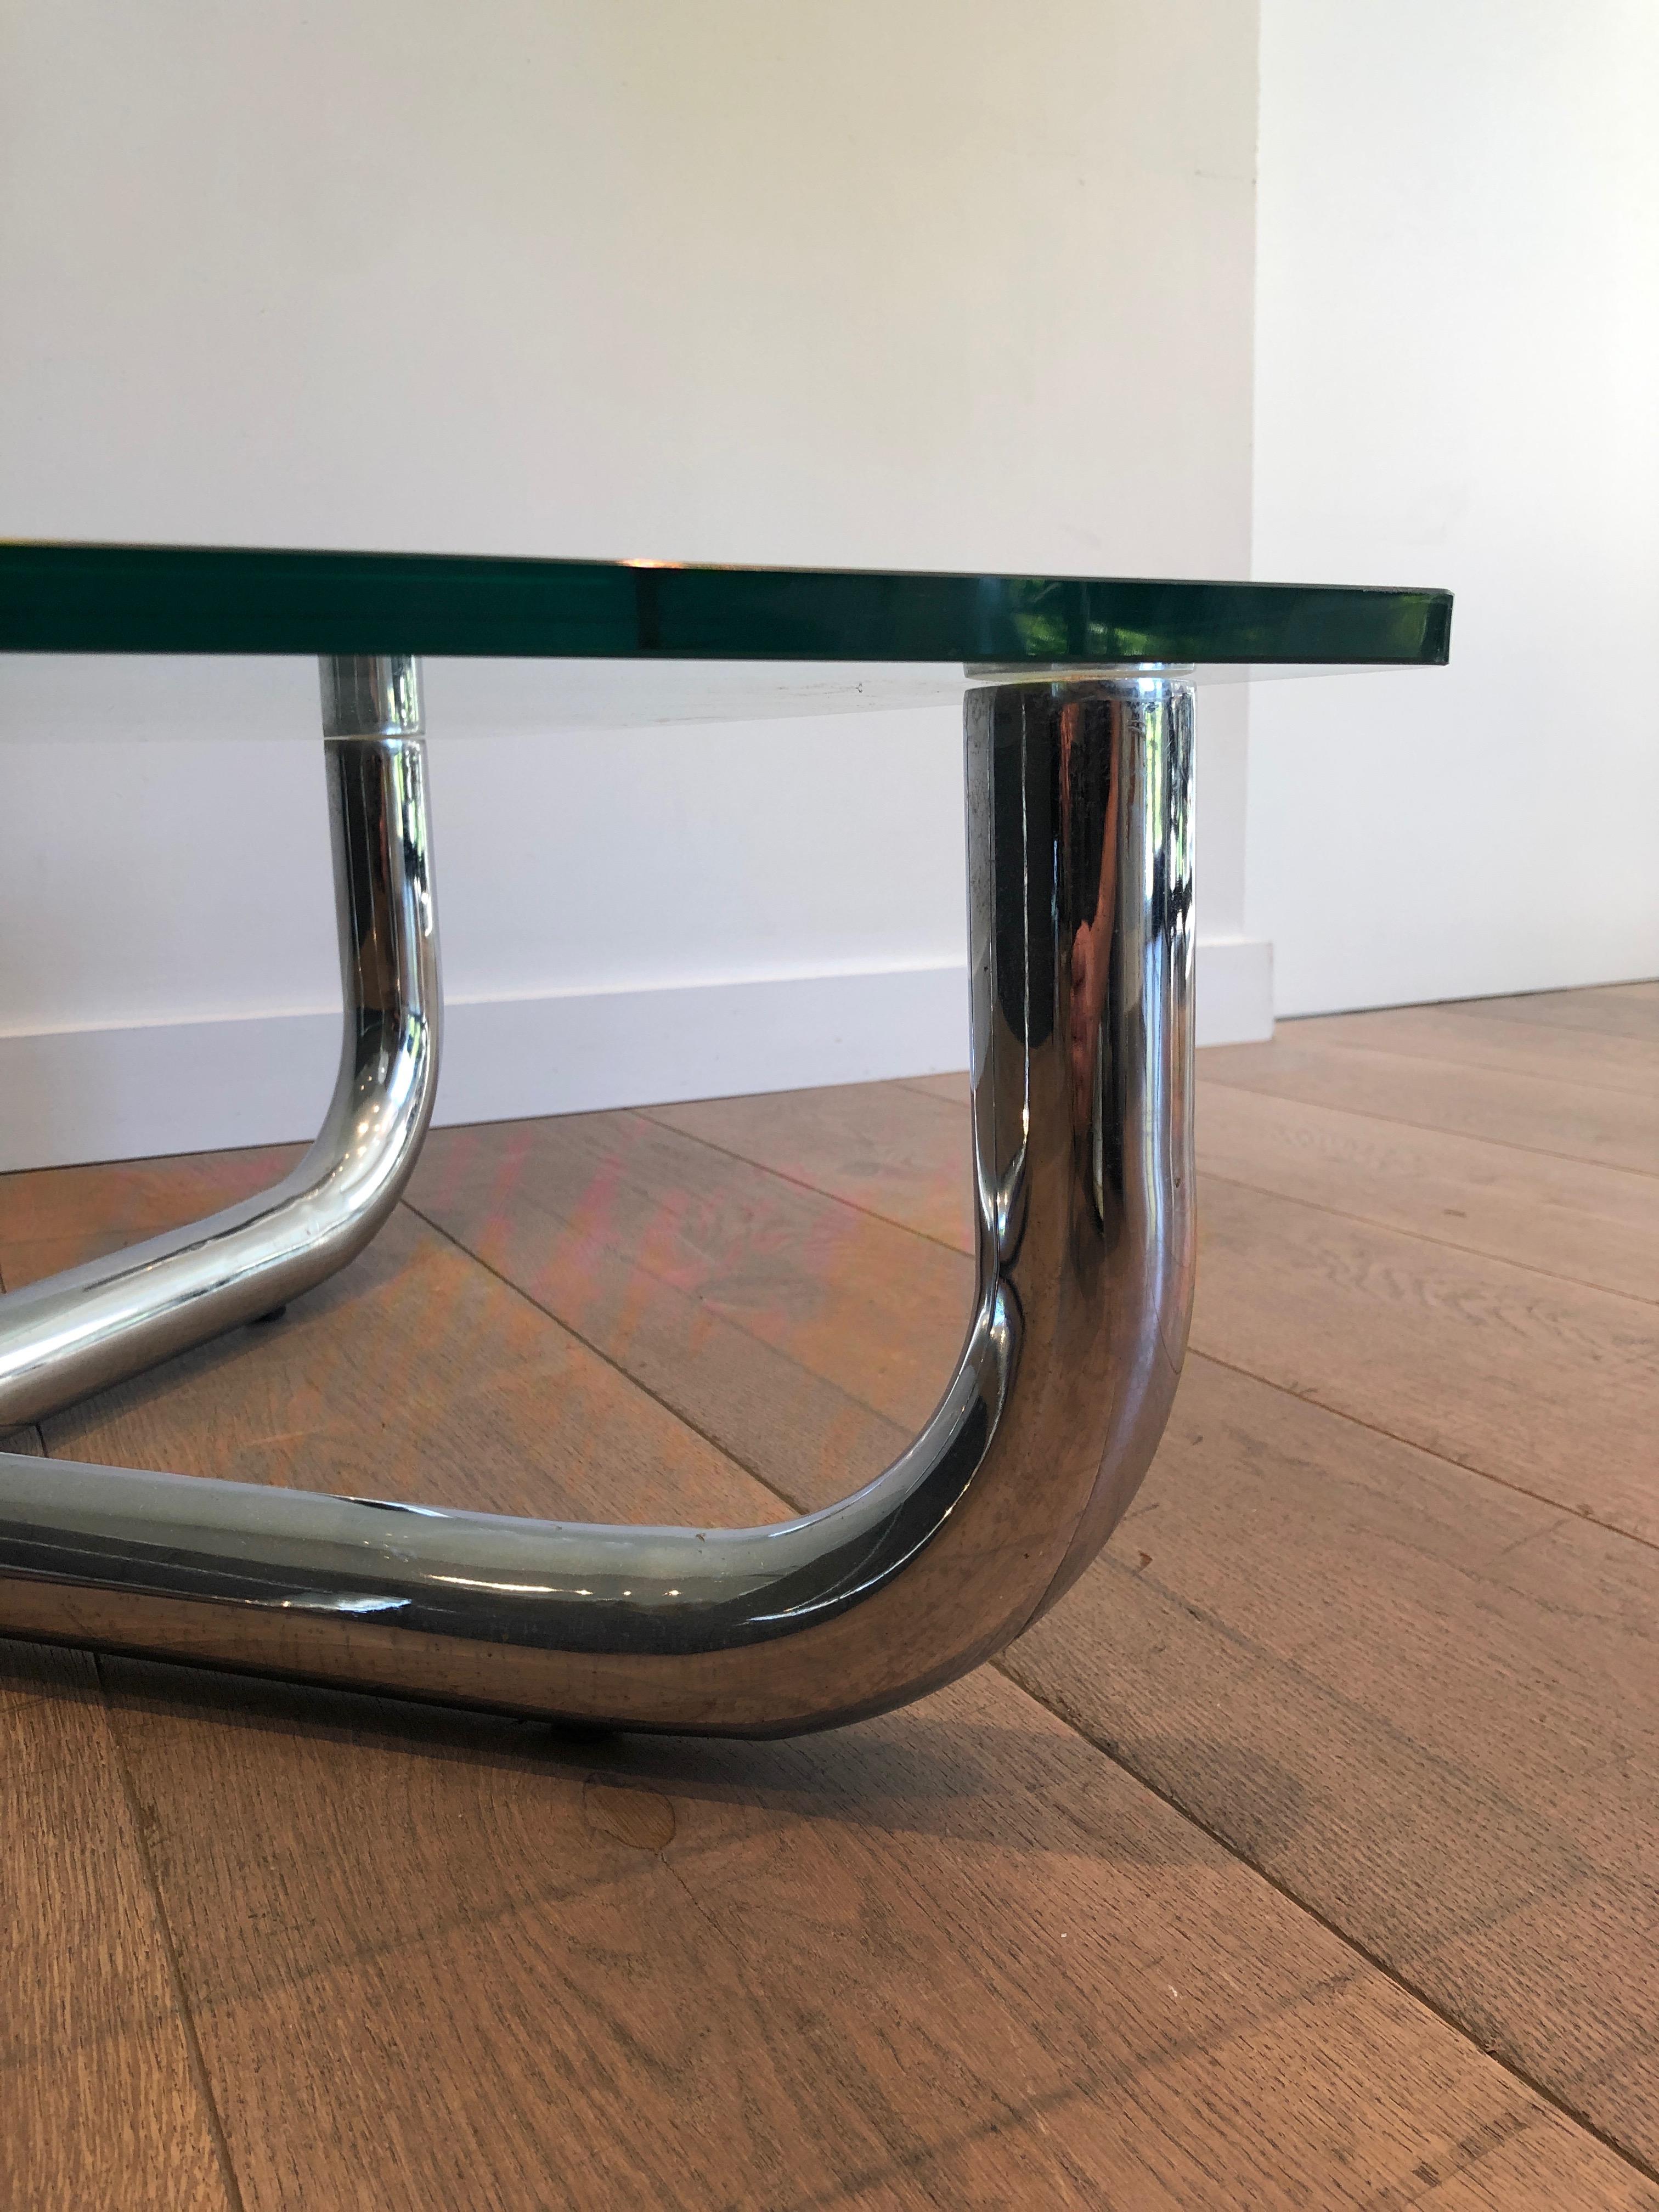 Chromed Coffee Table with Glass Shelf, French Work, Circa 1970 For Sale 3